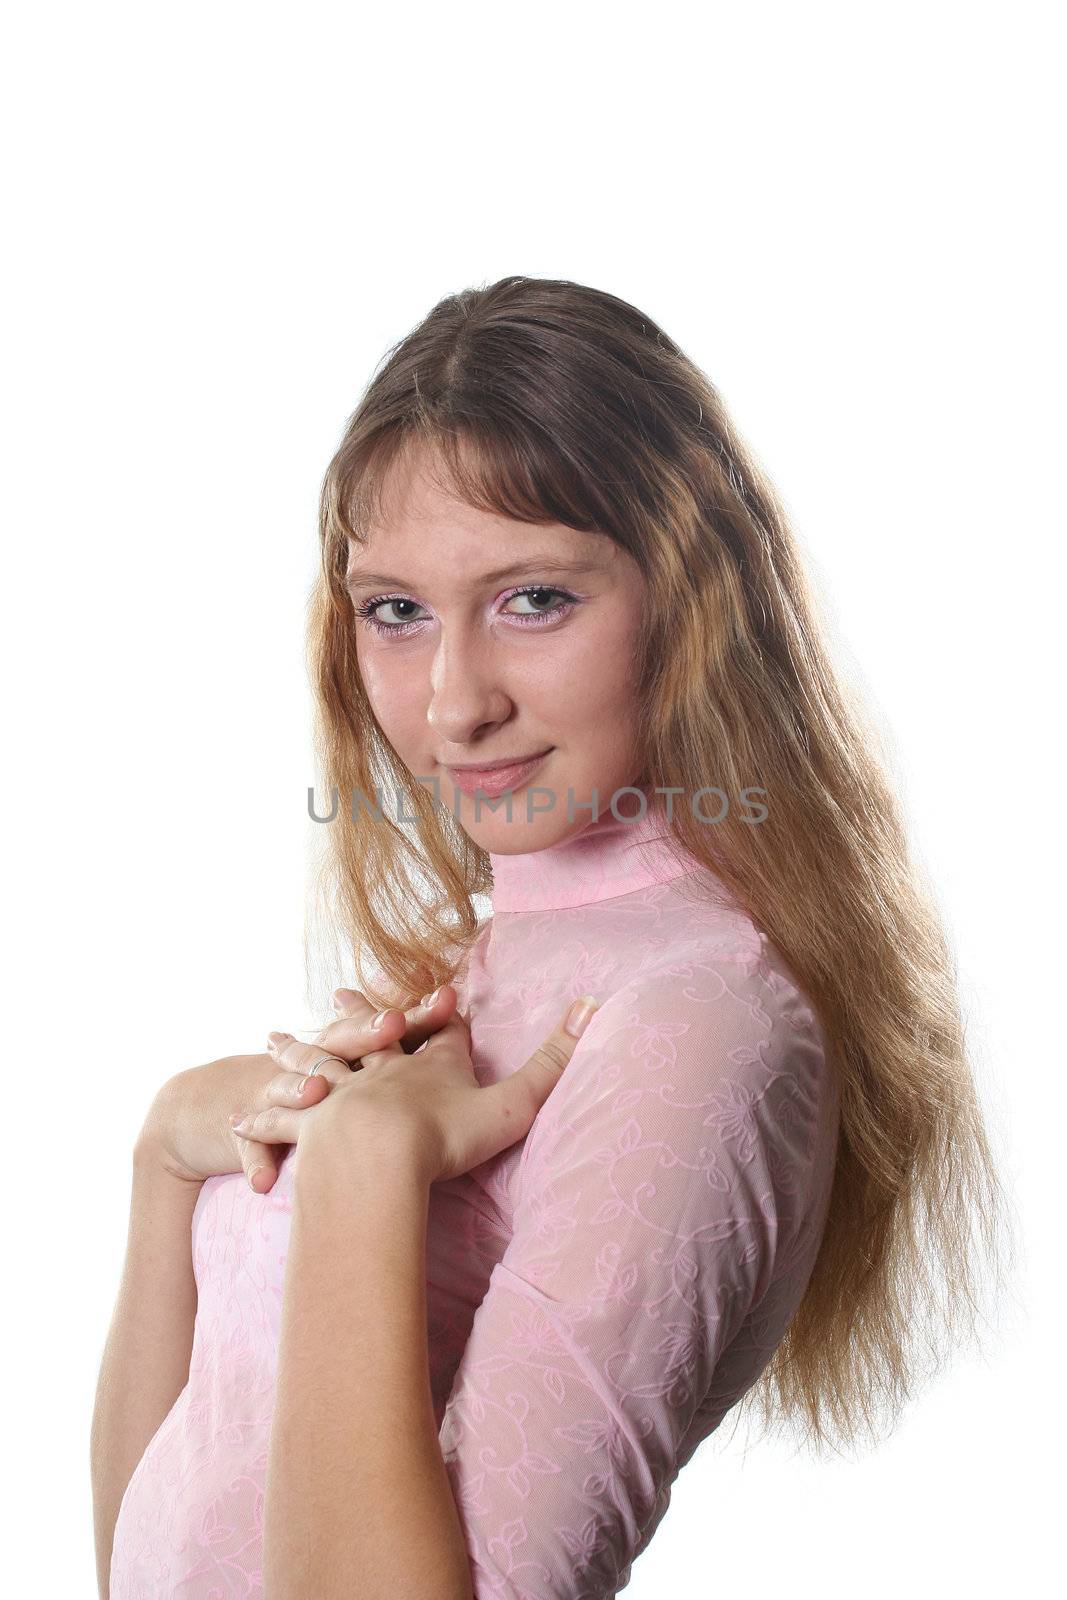 The long-haired girl poses on a white background